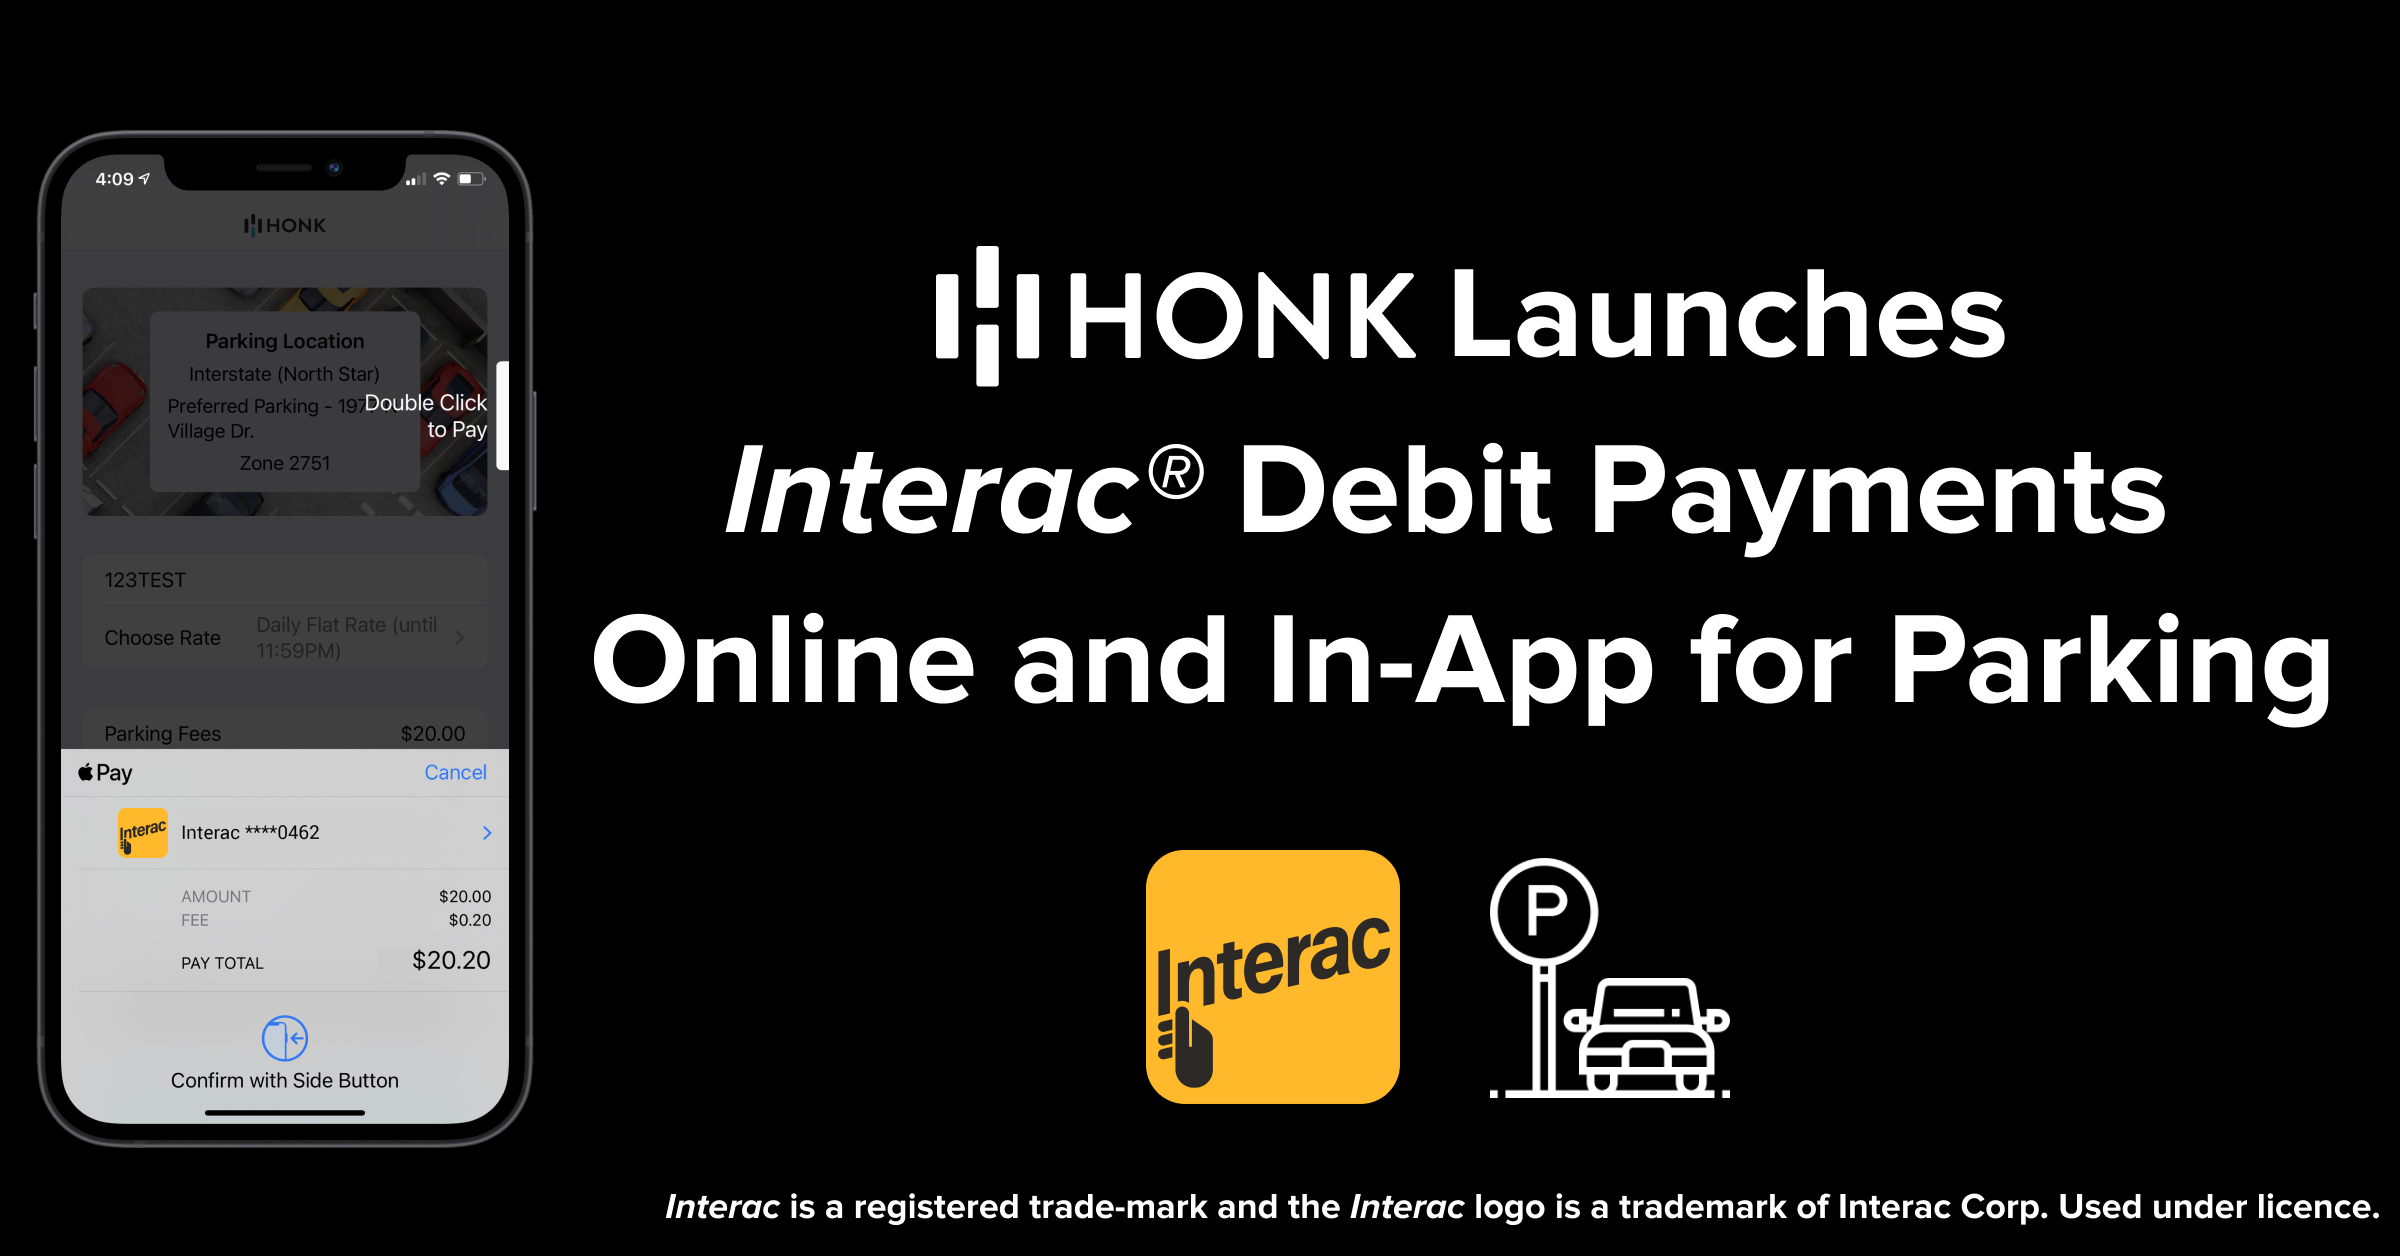 Honk launches Interac Debit payments online and in-app for parking.